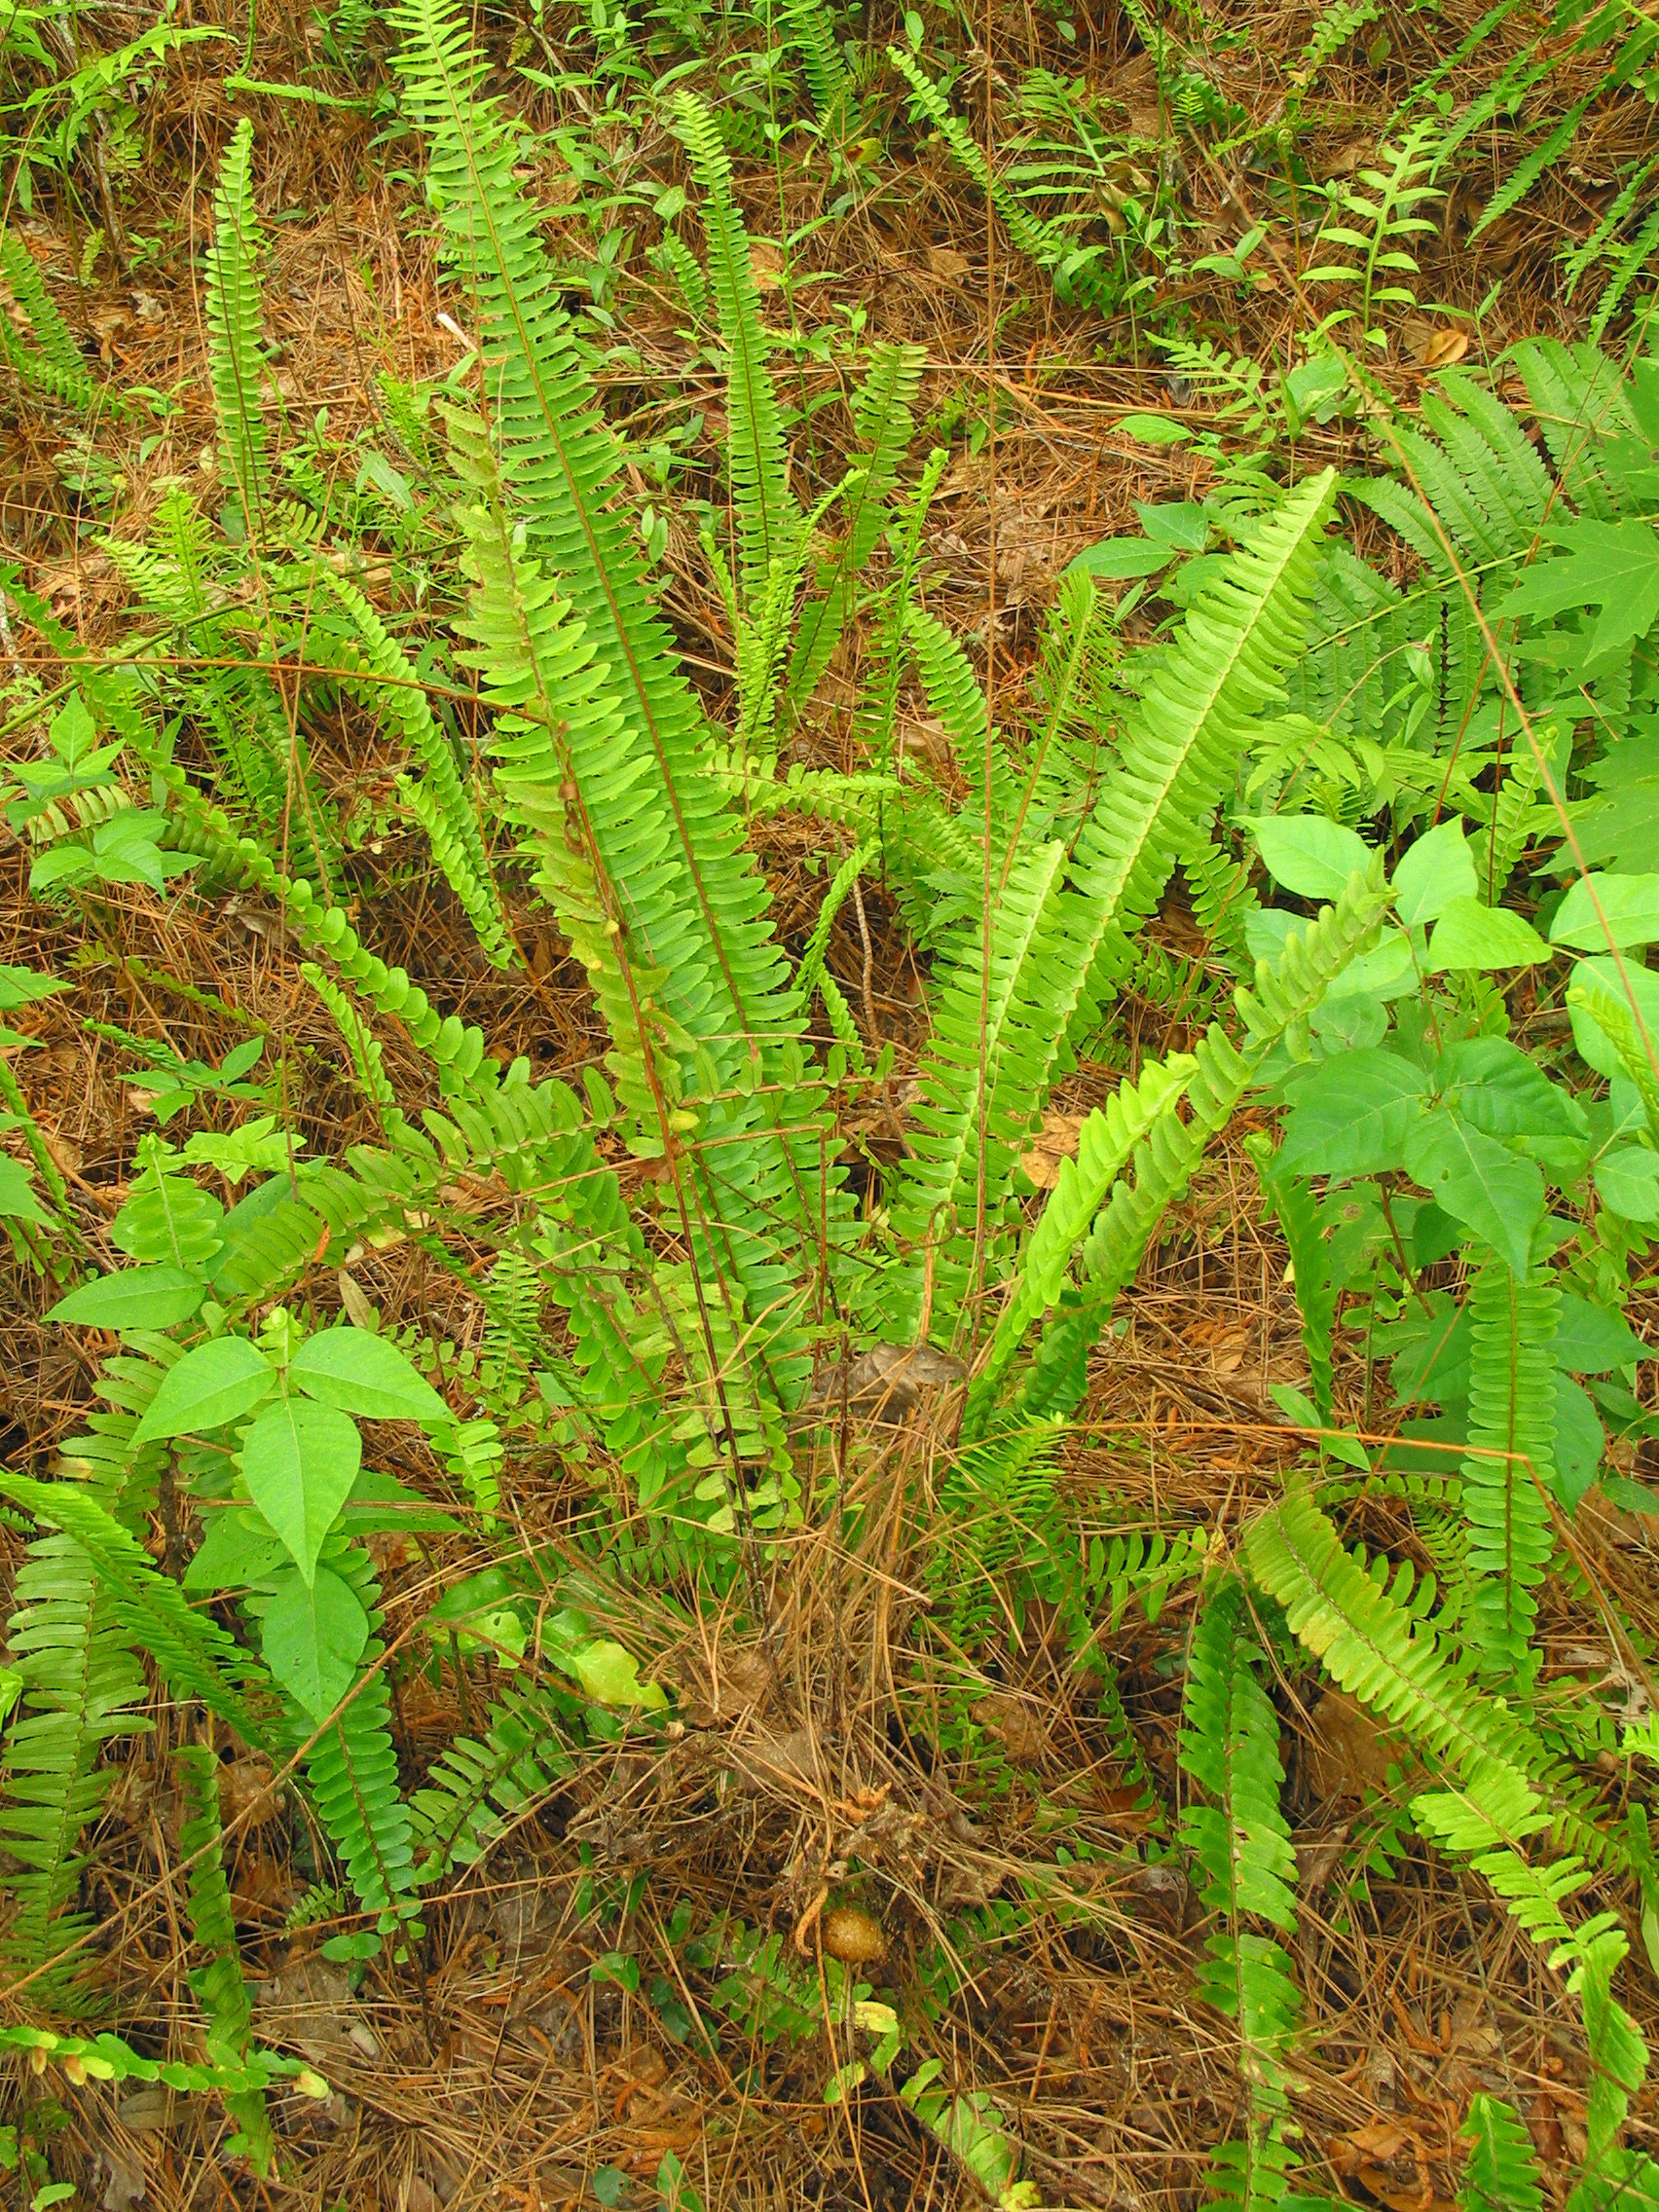 Tuberous sword fern in shaded forest understory.